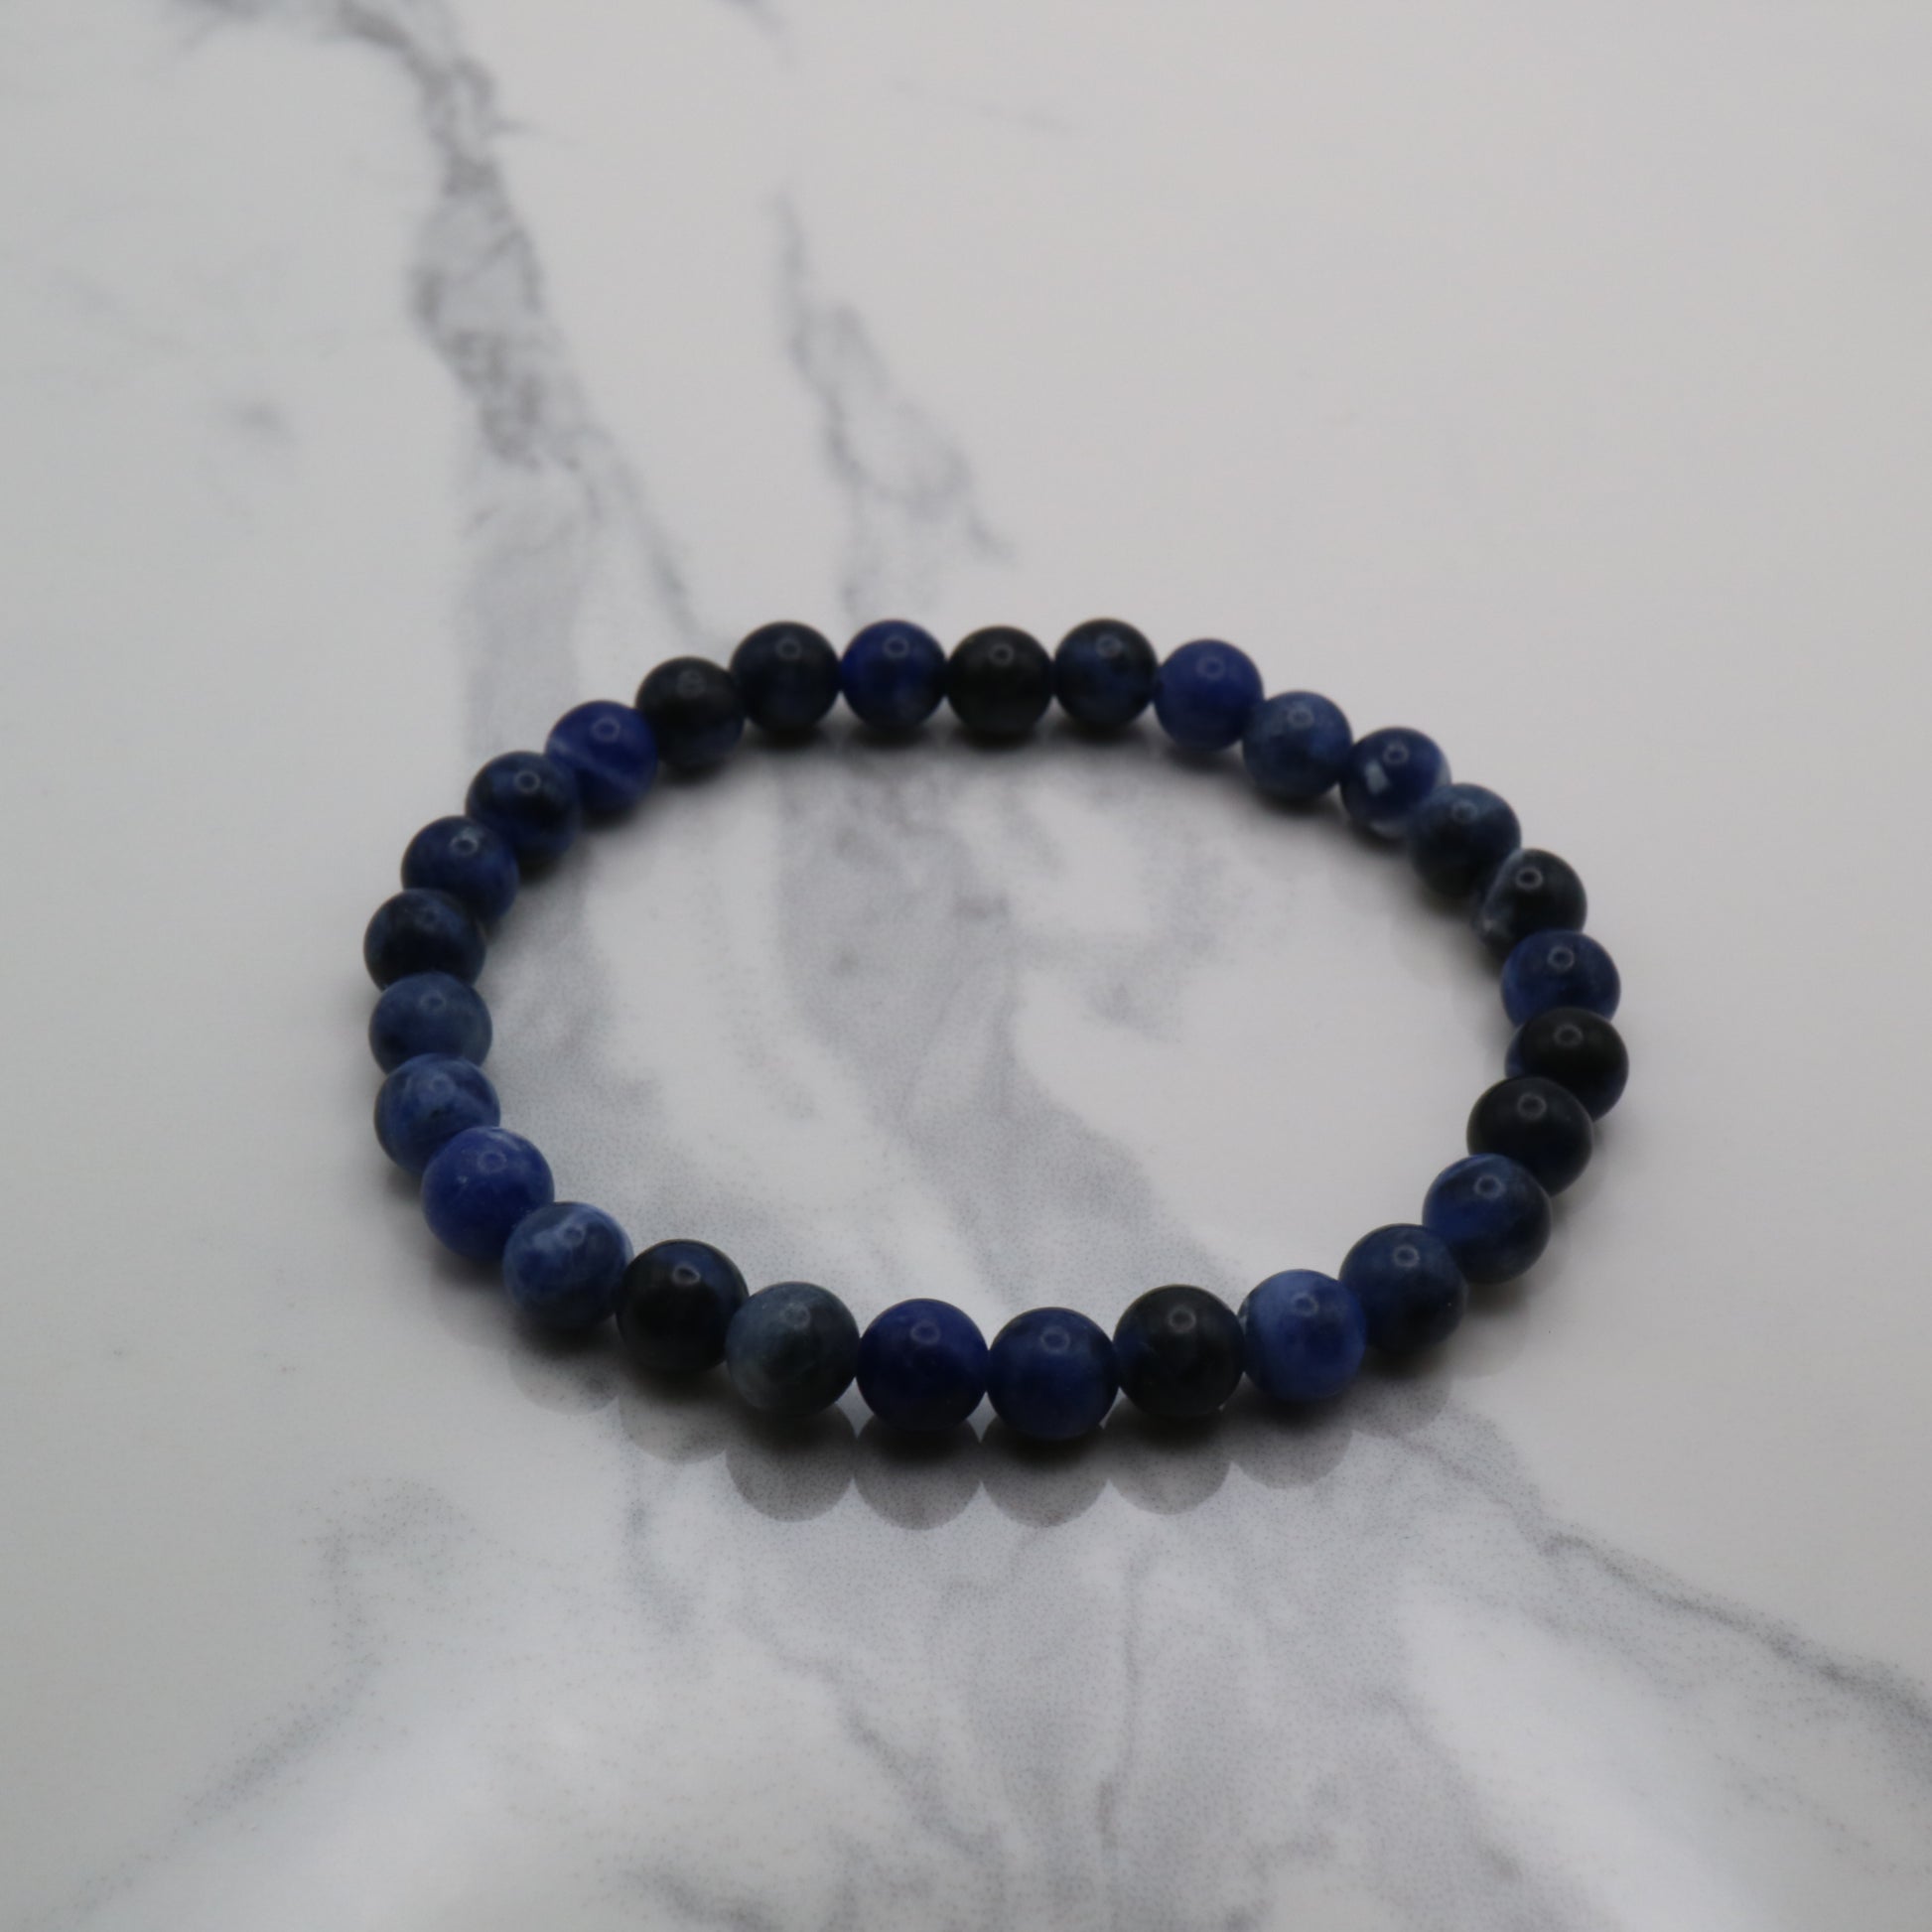 Sodalite crystal bead bracelet with 6mm size beads